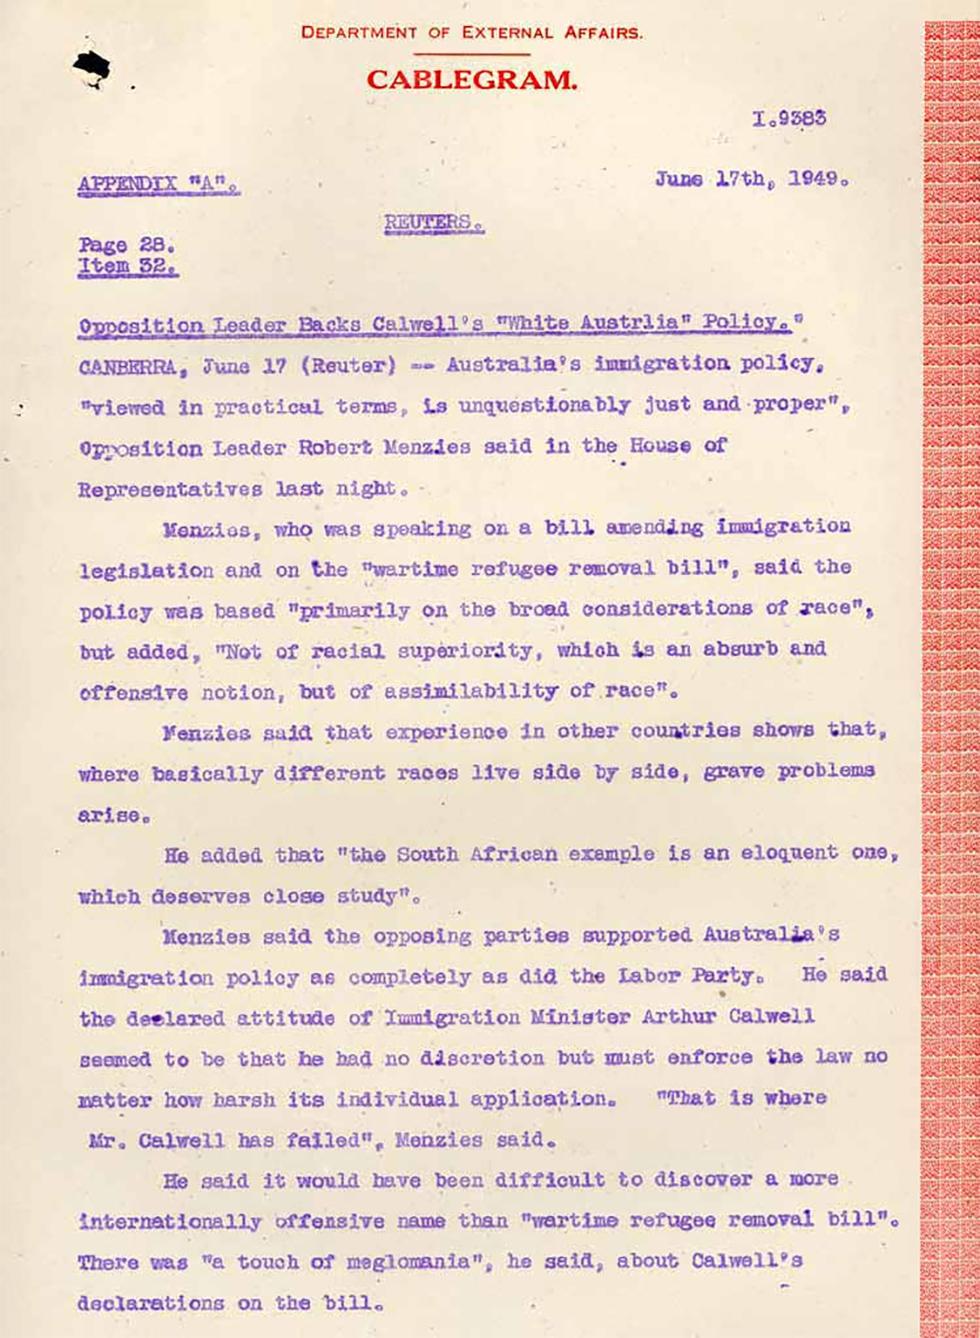 Cablegram about Menzies' speech on the wartime refugee removal bill.